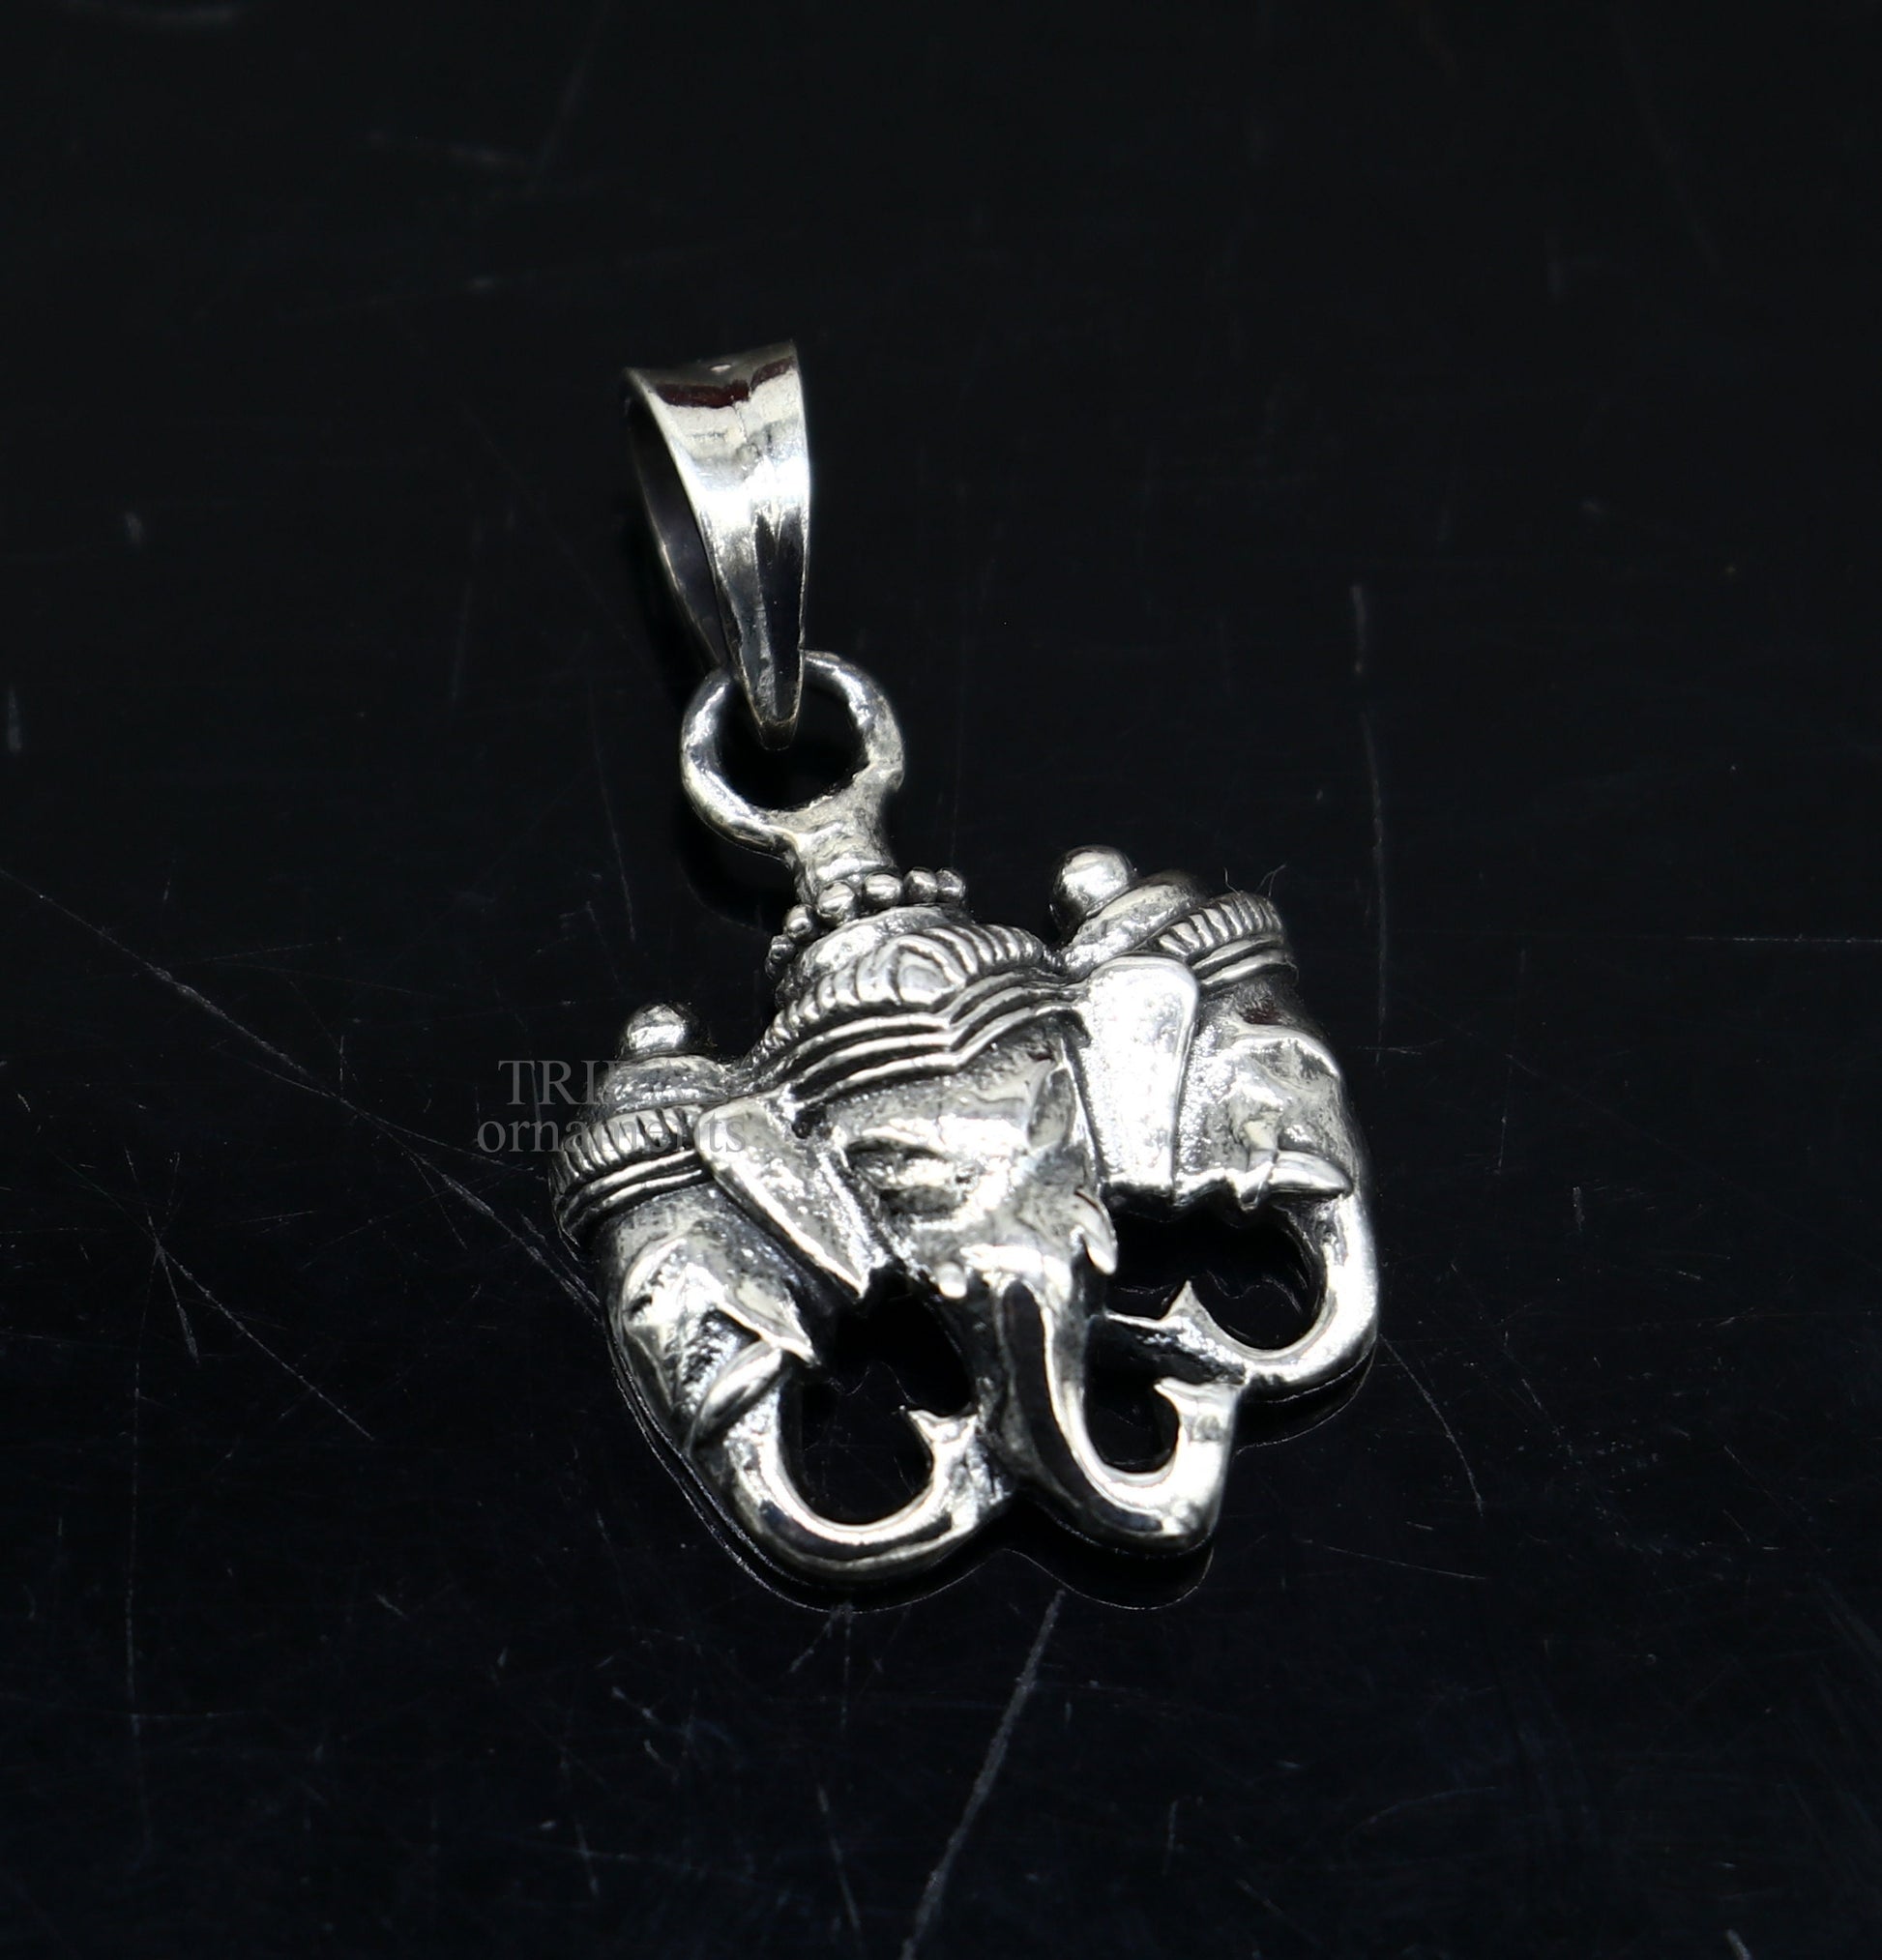 Exclusive design 925 sterling silver handmade 3 face Ganesha divine pendant, amazing stylish unisex pendant personalized jewelry ssp1644 - TRIBAL ORNAMENTS